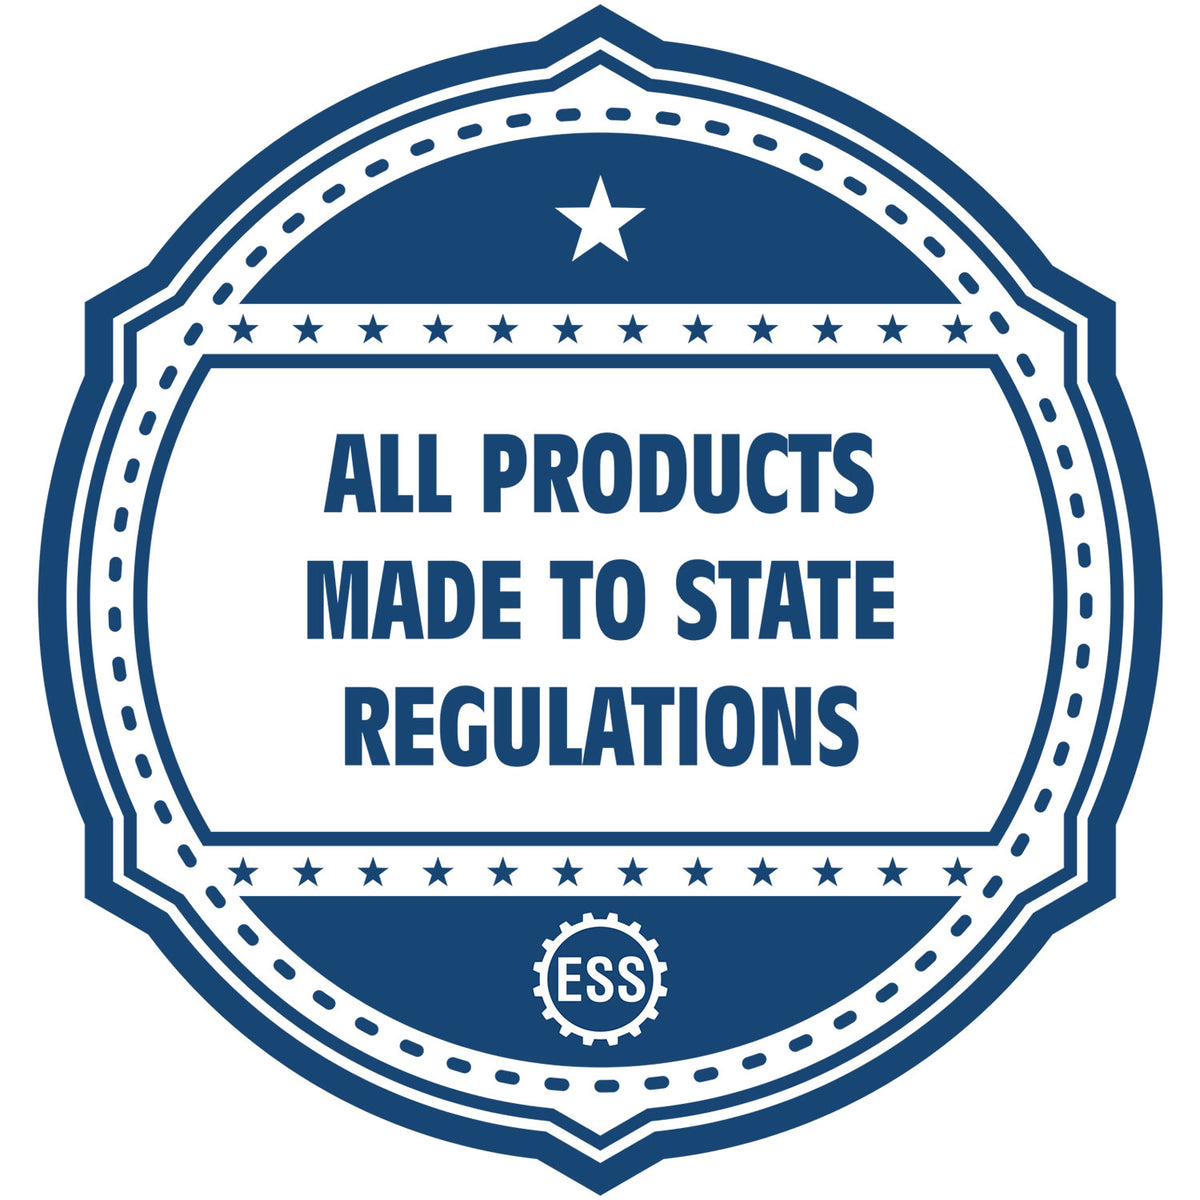 An icon or badge element for the Heavy-Duty Louisiana Rectangular Notary Stamp showing that this product is made in compliance with state regulations.